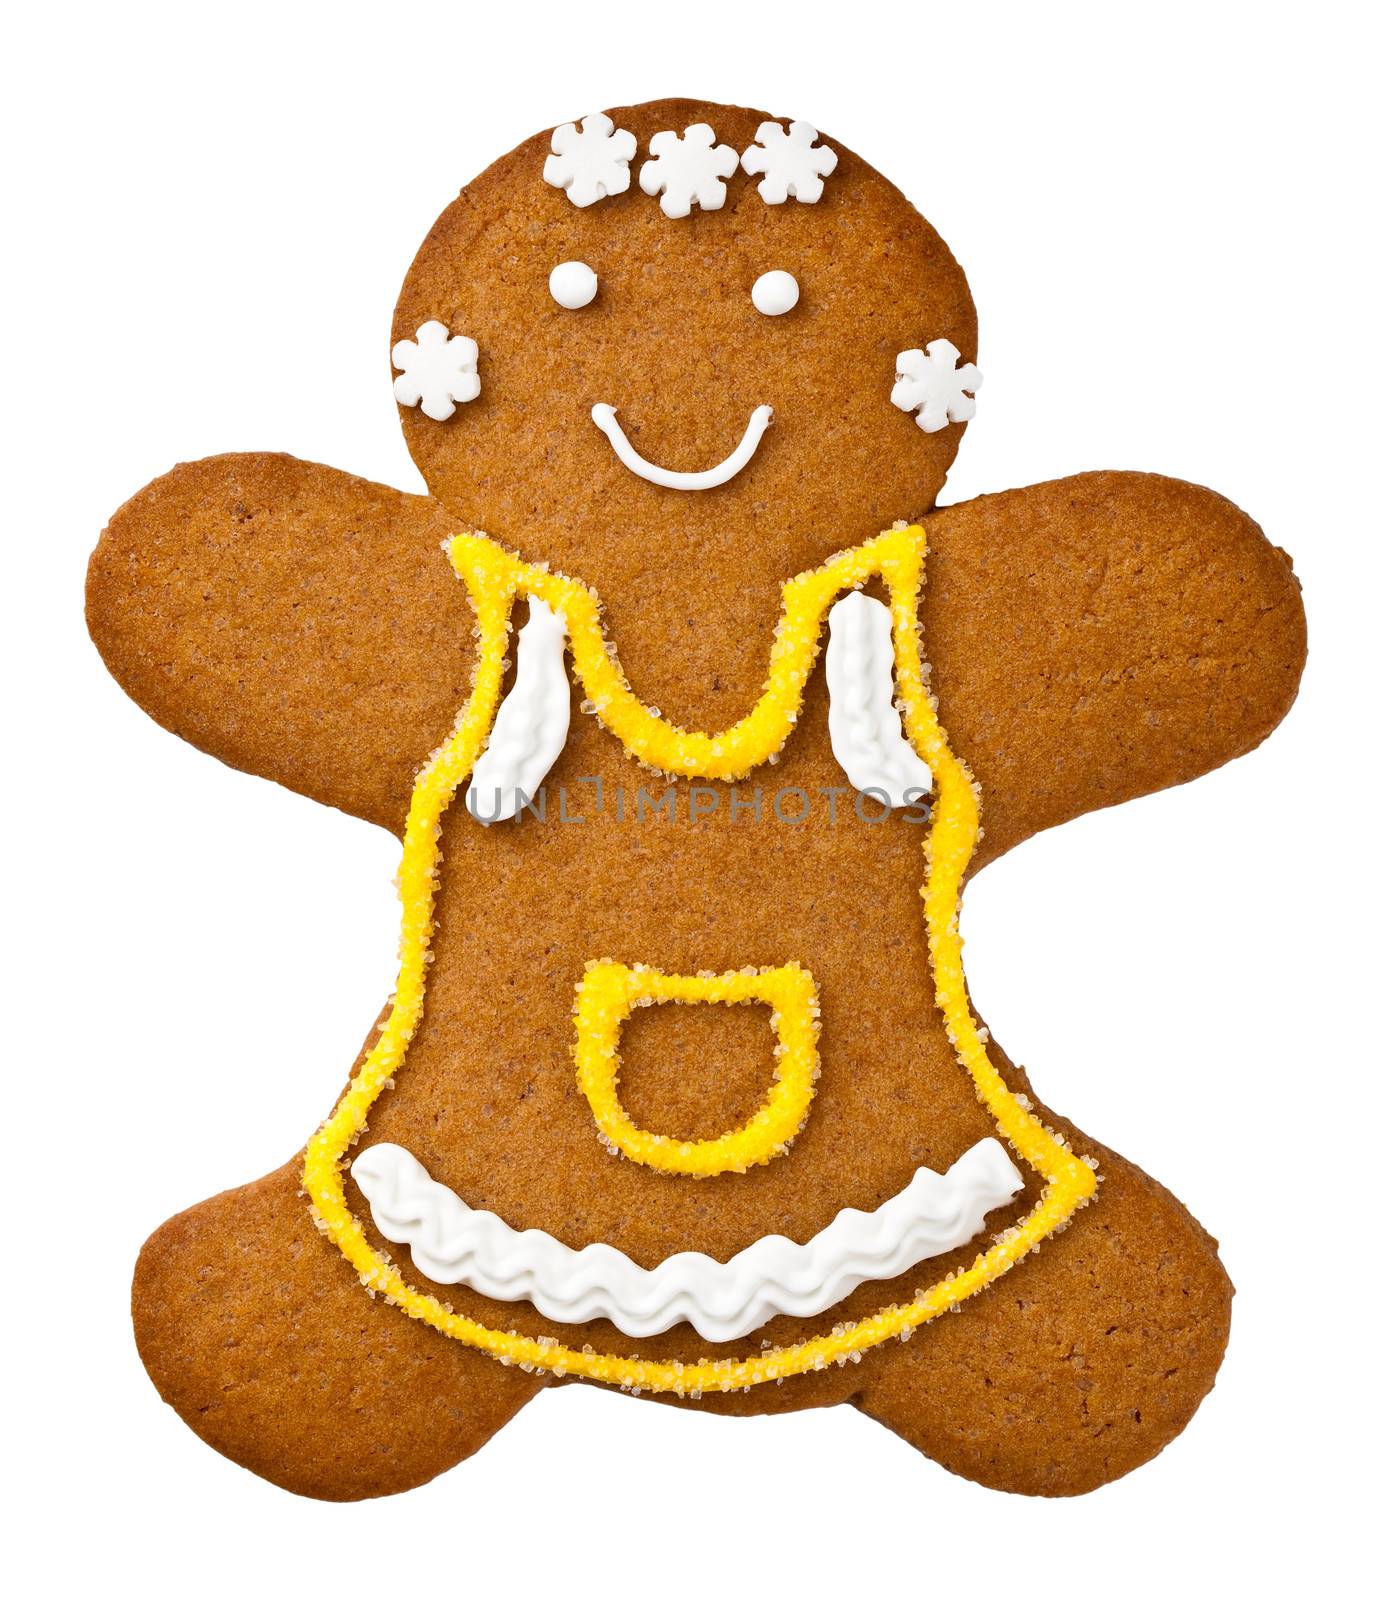 Gingerbread woman isolated on white background. Christmas cookie
